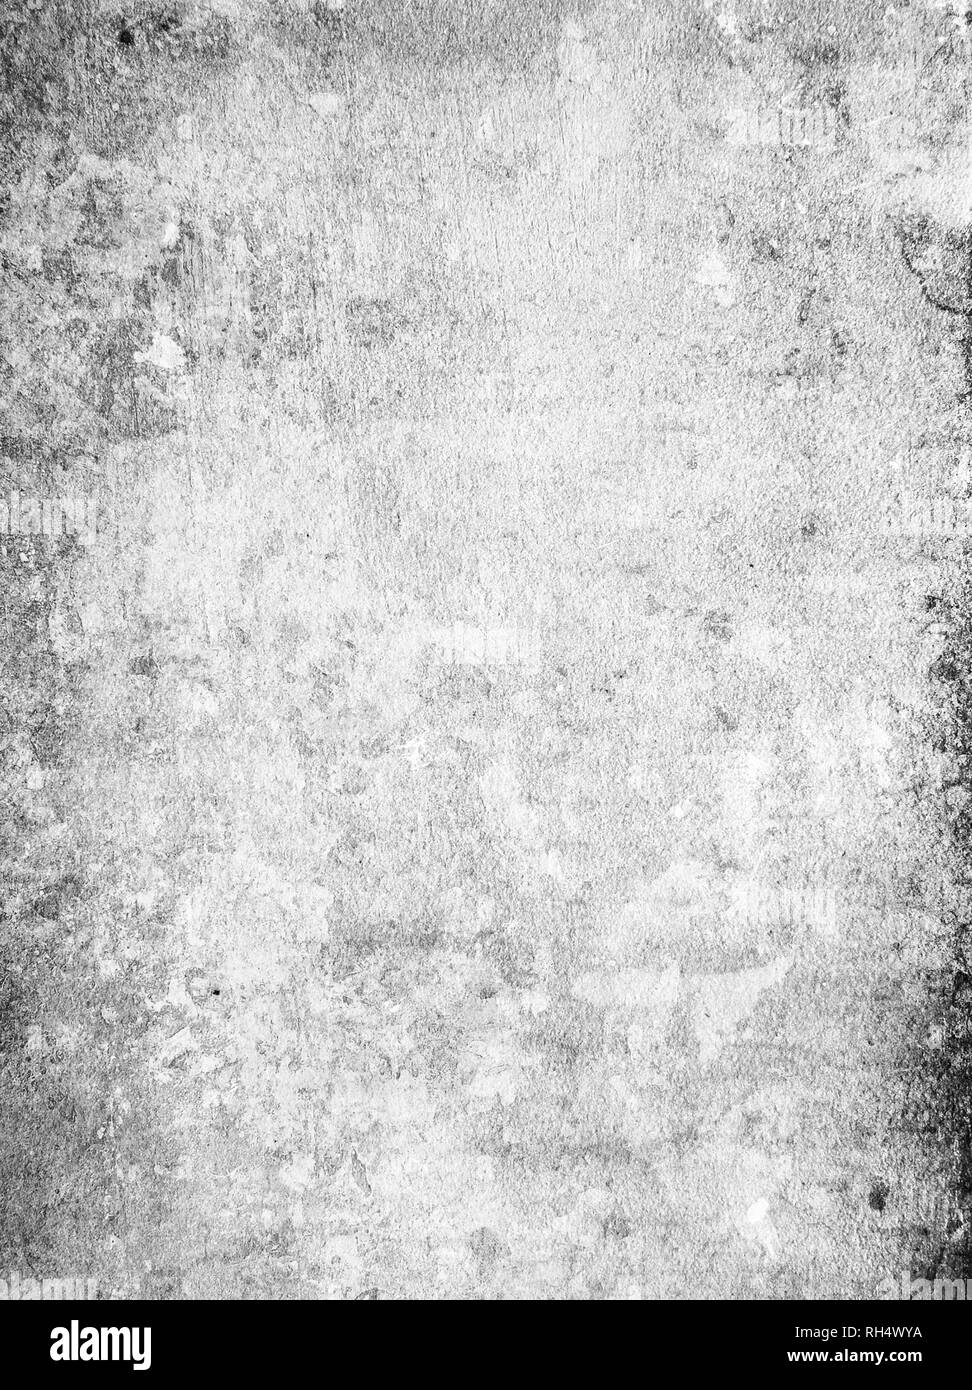 Dirty damaged aged paper textured pattern Stock Photo